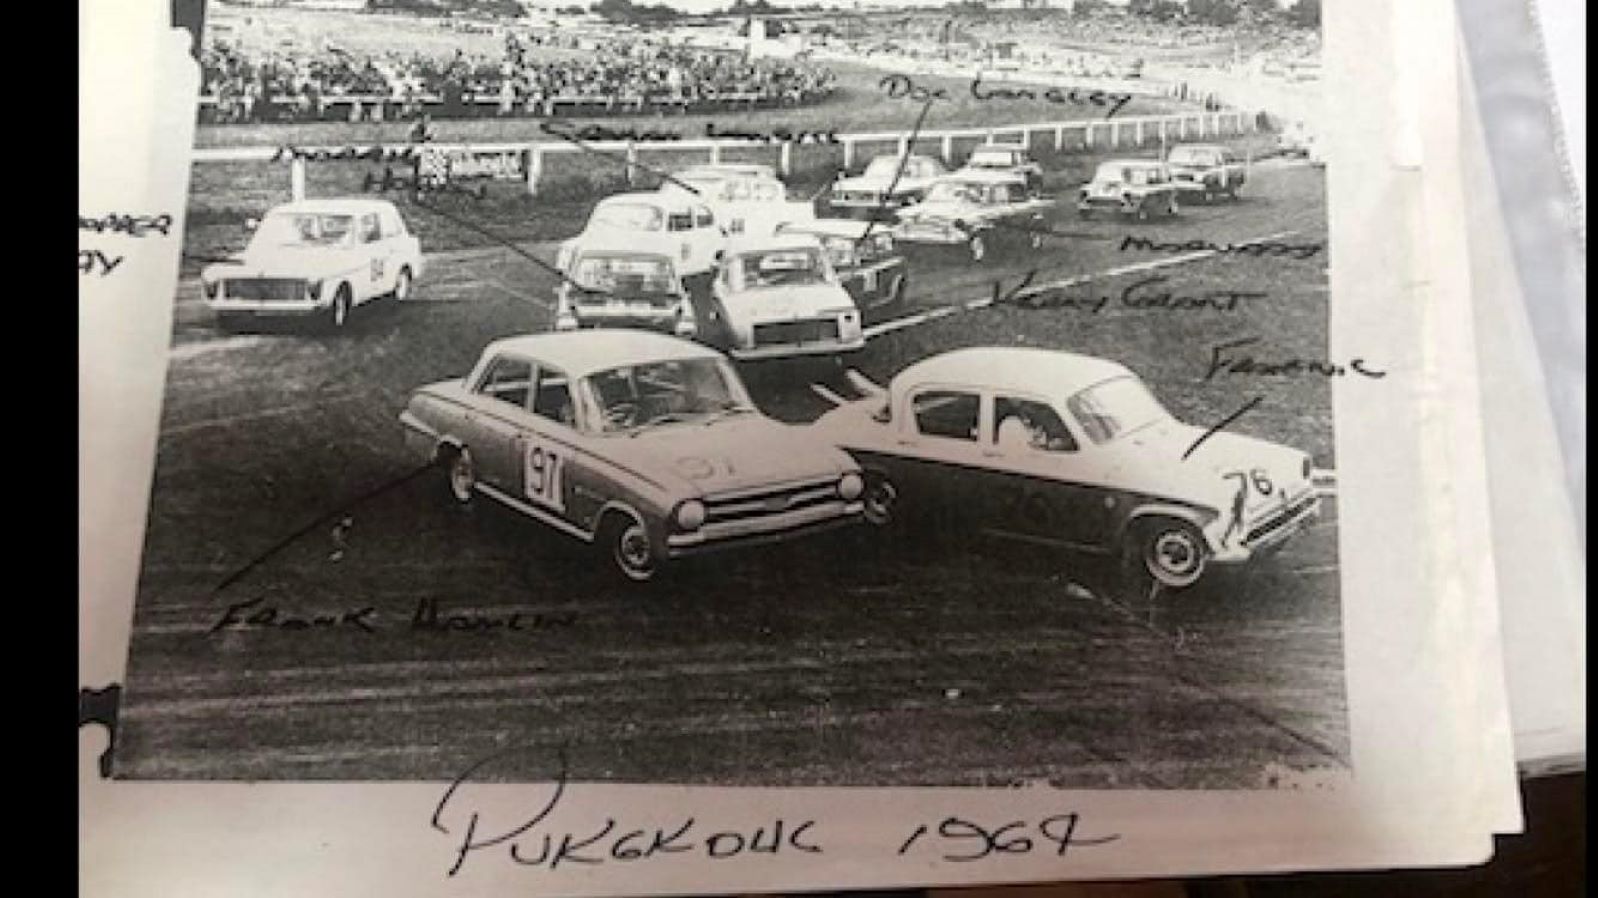 Name:  Pukekohe 1964 #022 1964 Saloon Car field at the Elbow - GP meeting Q 172 kb arch HVRA Bruce Dyer.jpg
Views: 341
Size:  172.4 KB